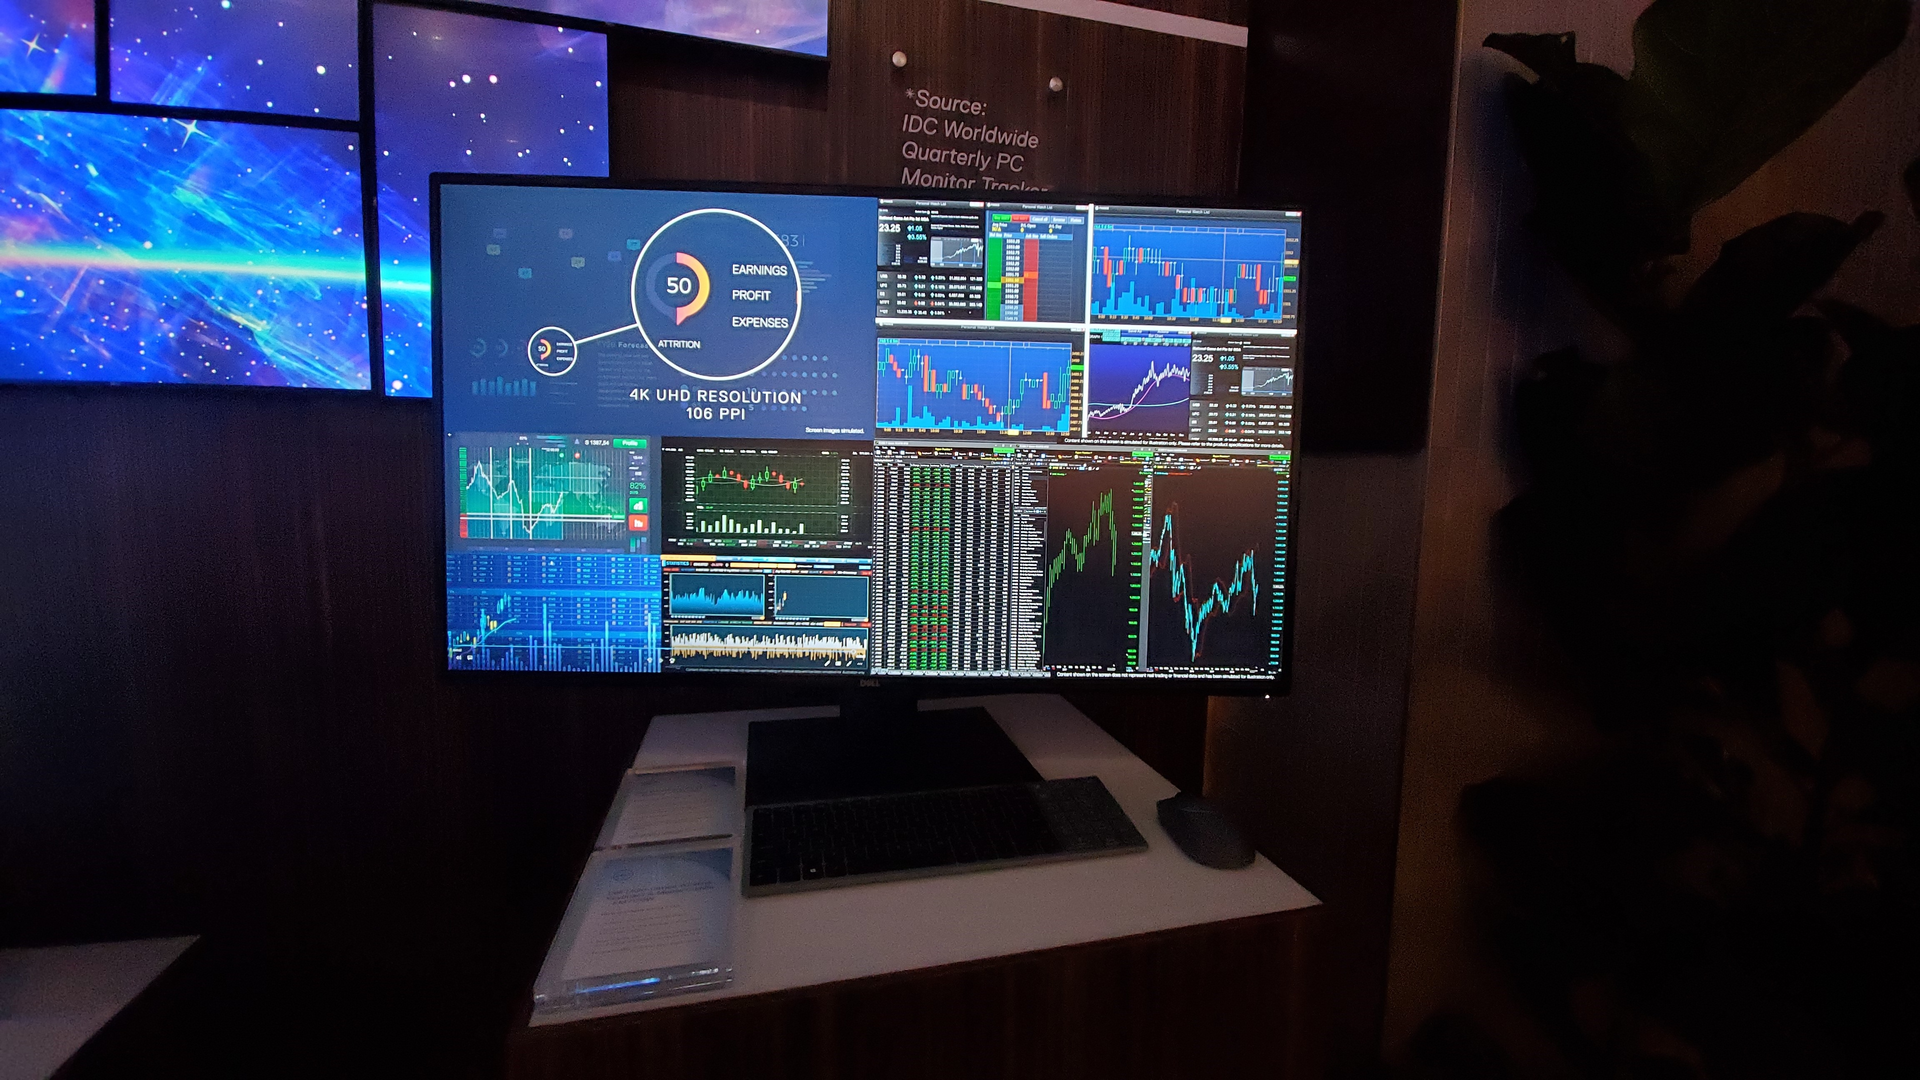 CES 2020 Kepczyk Dell 43 Monitor